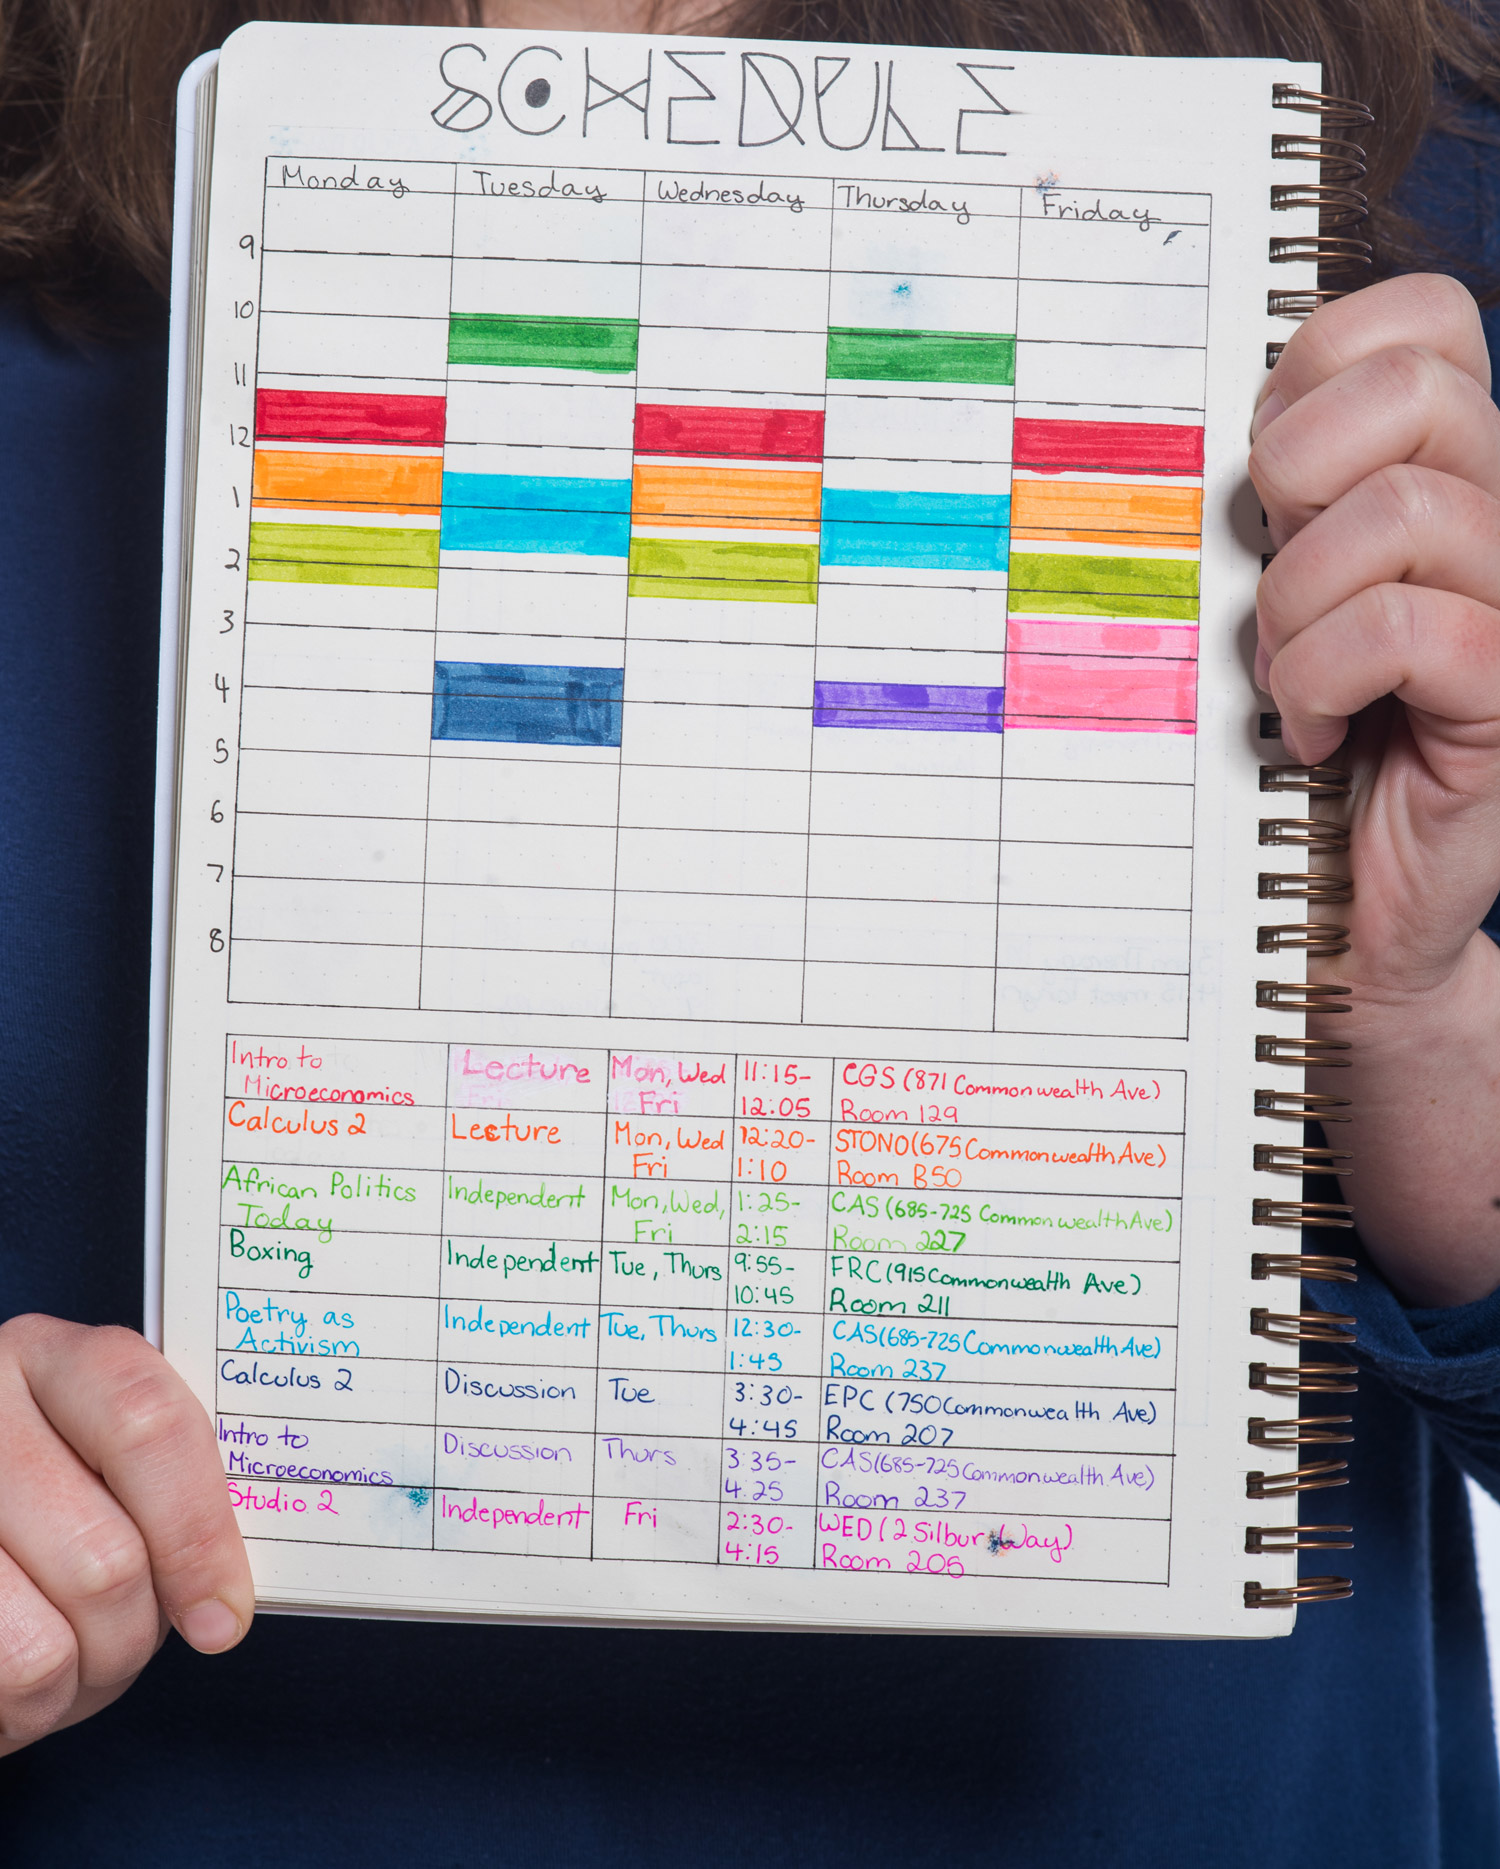 A photo of a bullet journal turned to a page reading "Schedule"